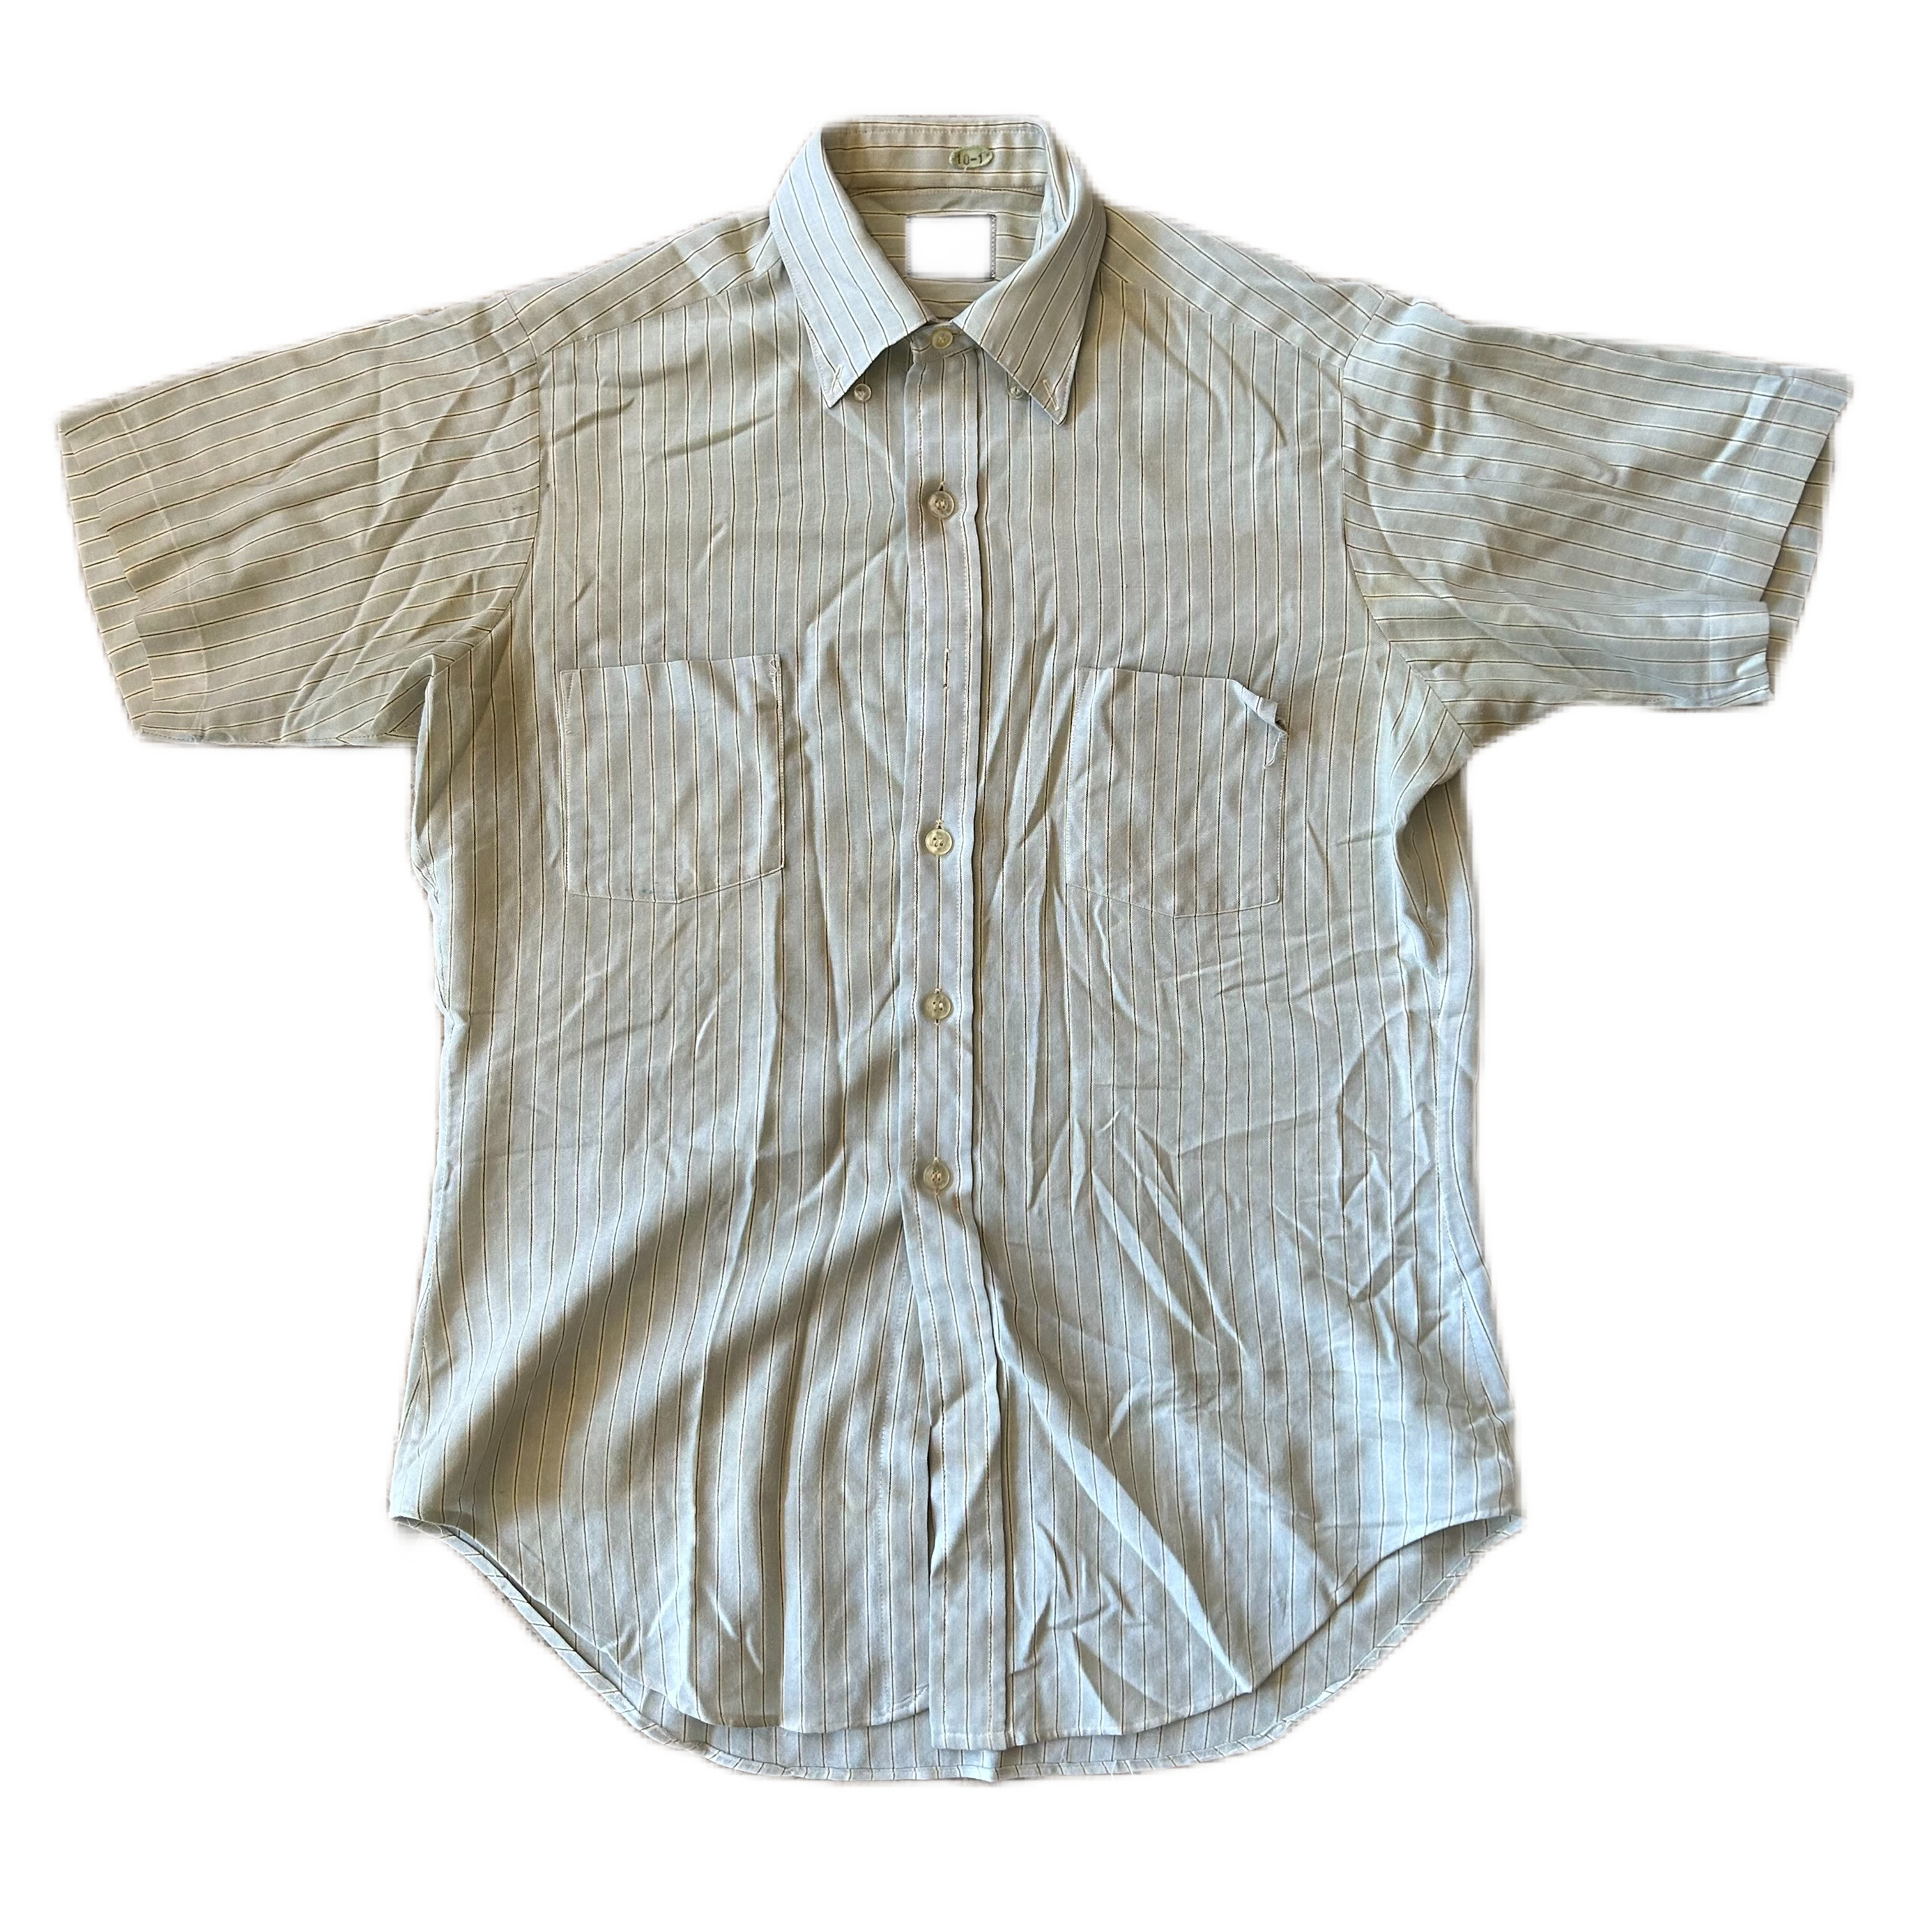 Vintage 1980s Sears Button Down Shortsleeve Shirt